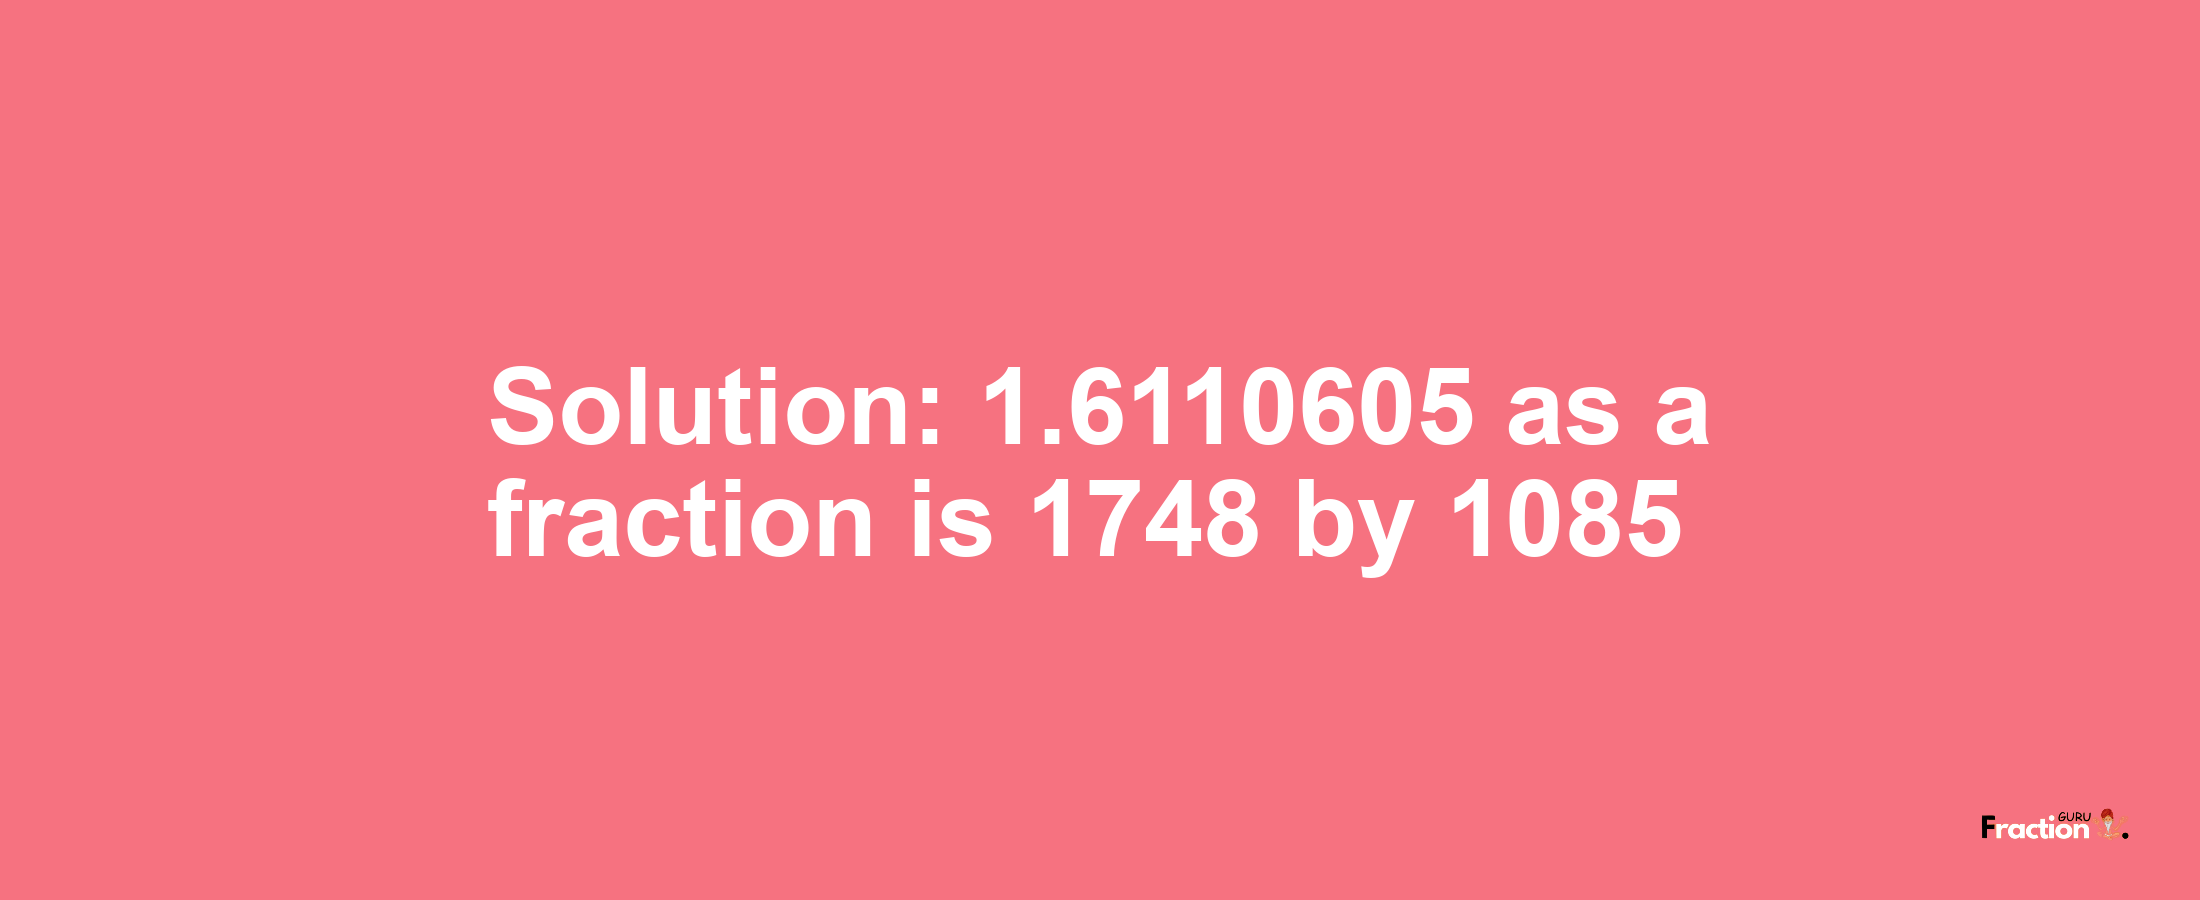 Solution:1.6110605 as a fraction is 1748/1085